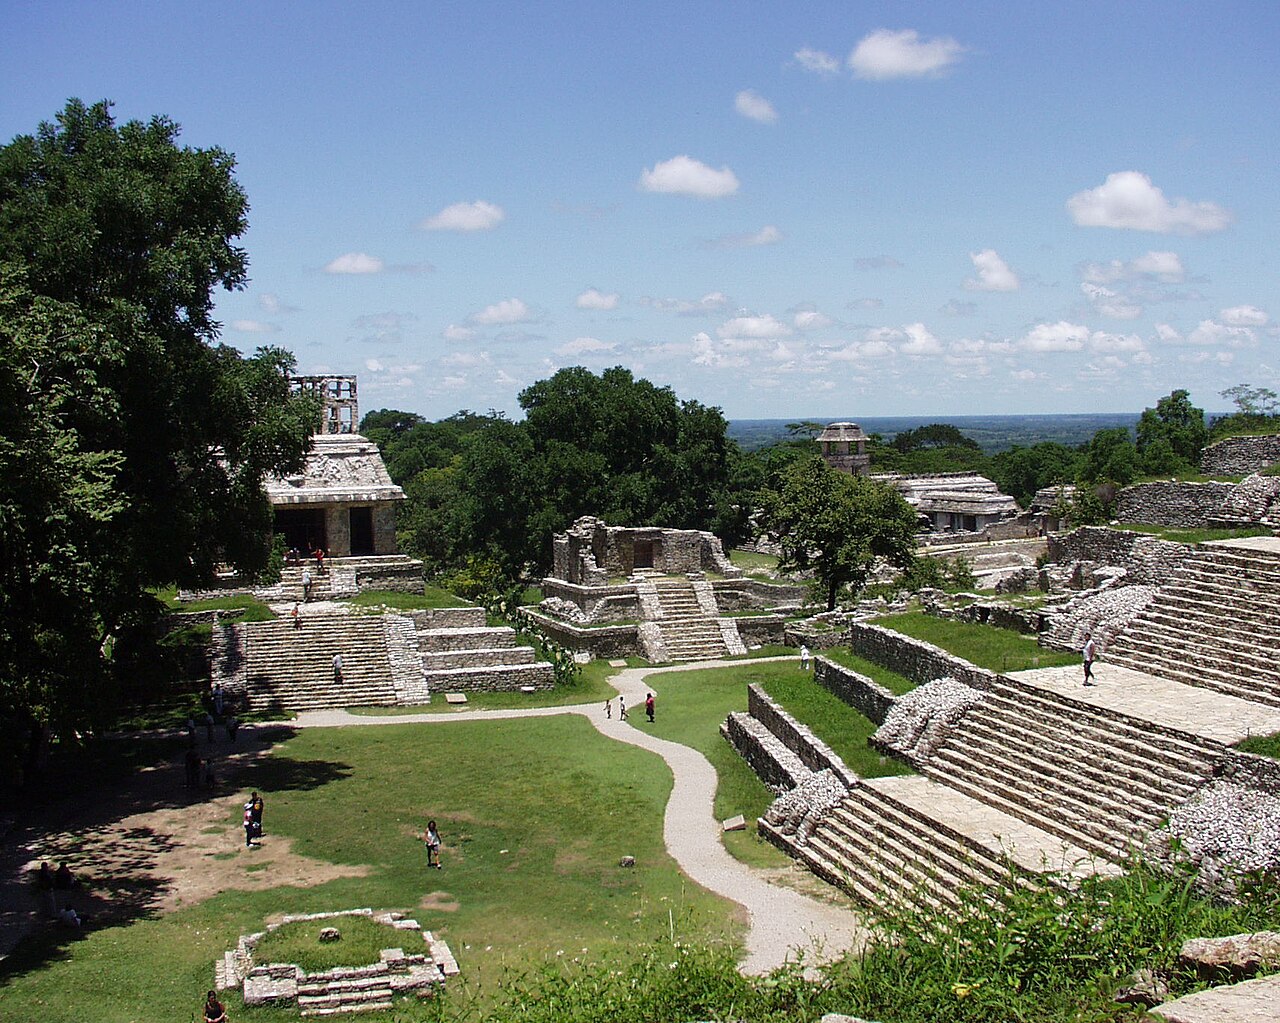 View of ancient Mayan ruins with stone steps, platforms, and structures surrounded by lush greenery and pathways. Visitors are walking around the archaeological site under a partly cloudy sky.